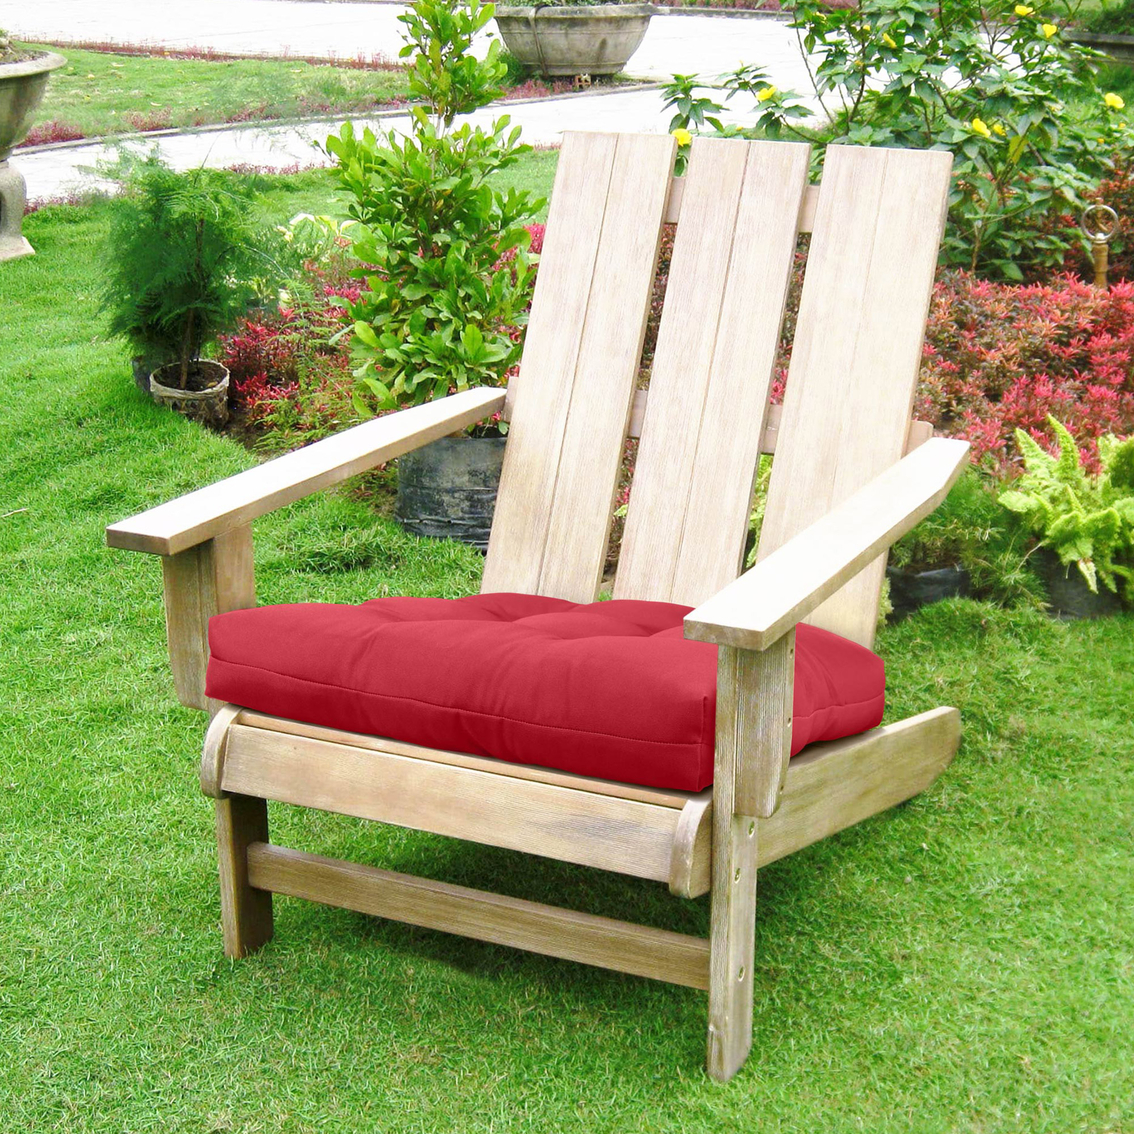 Outdoor Decor Ruby Red Adirondack Tufted Chair Cushion with Handle - Image 2 of 3